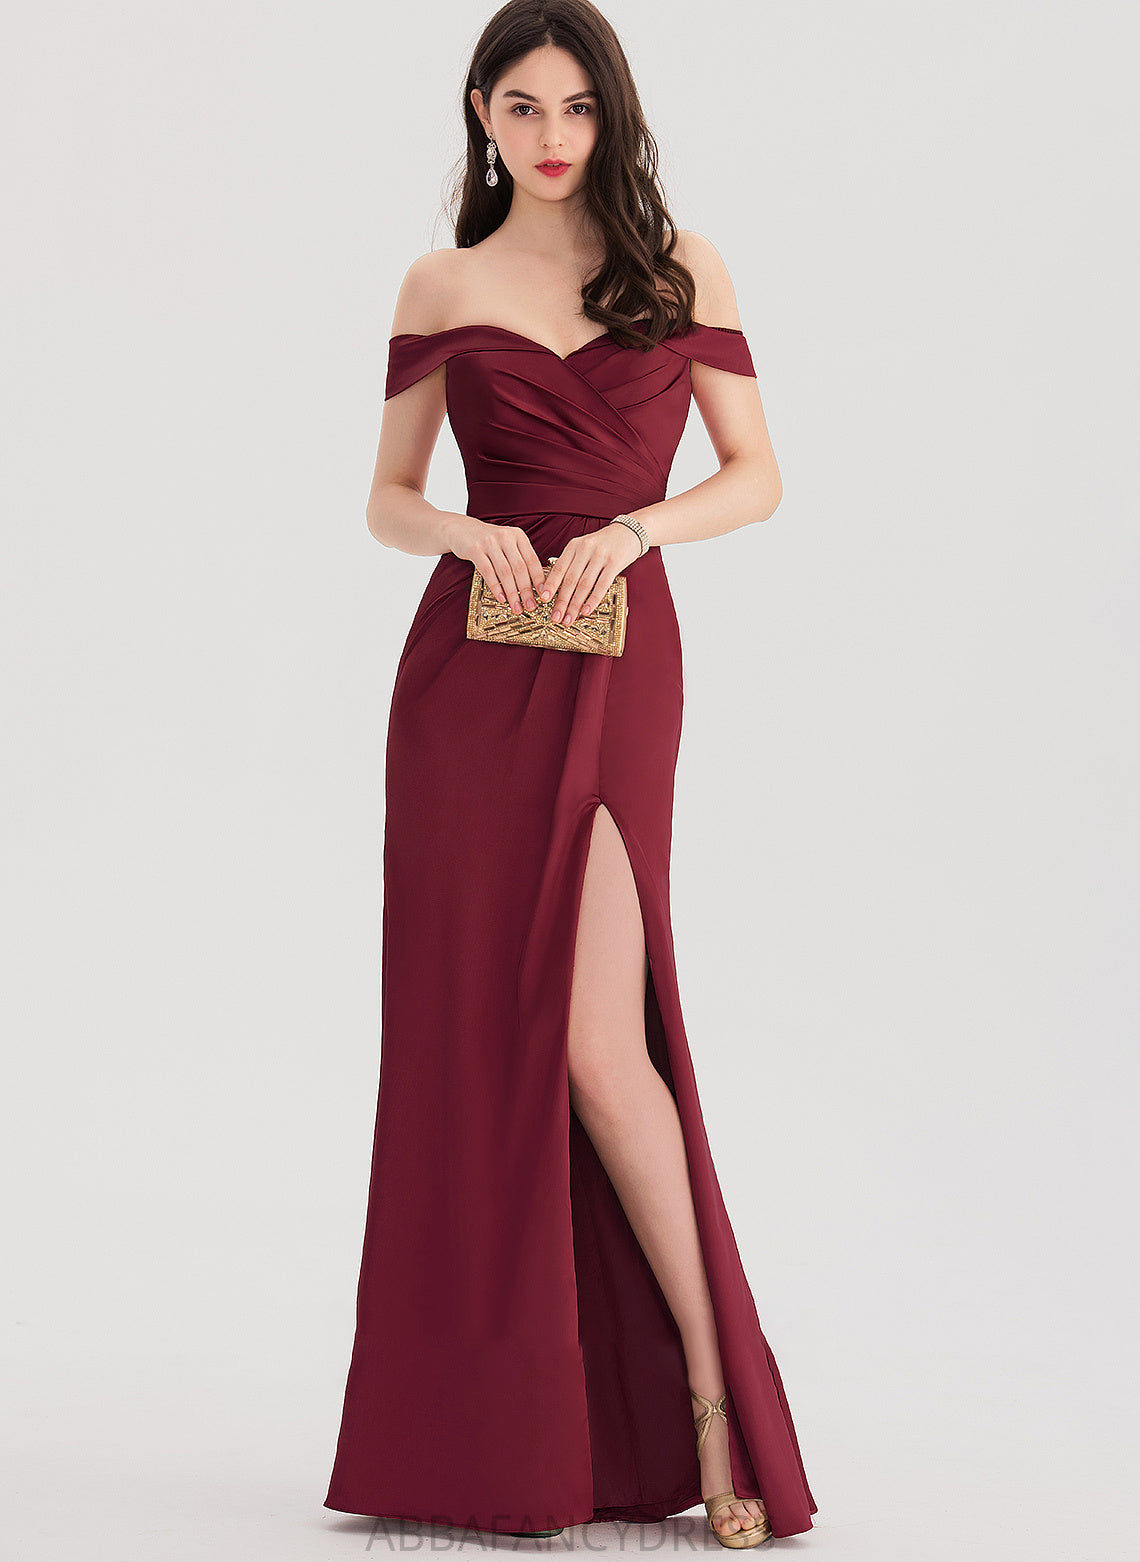 Ruffle Front Split Zoey With Sheath/Column Satin Off-the-Shoulder Floor-Length Prom Dresses